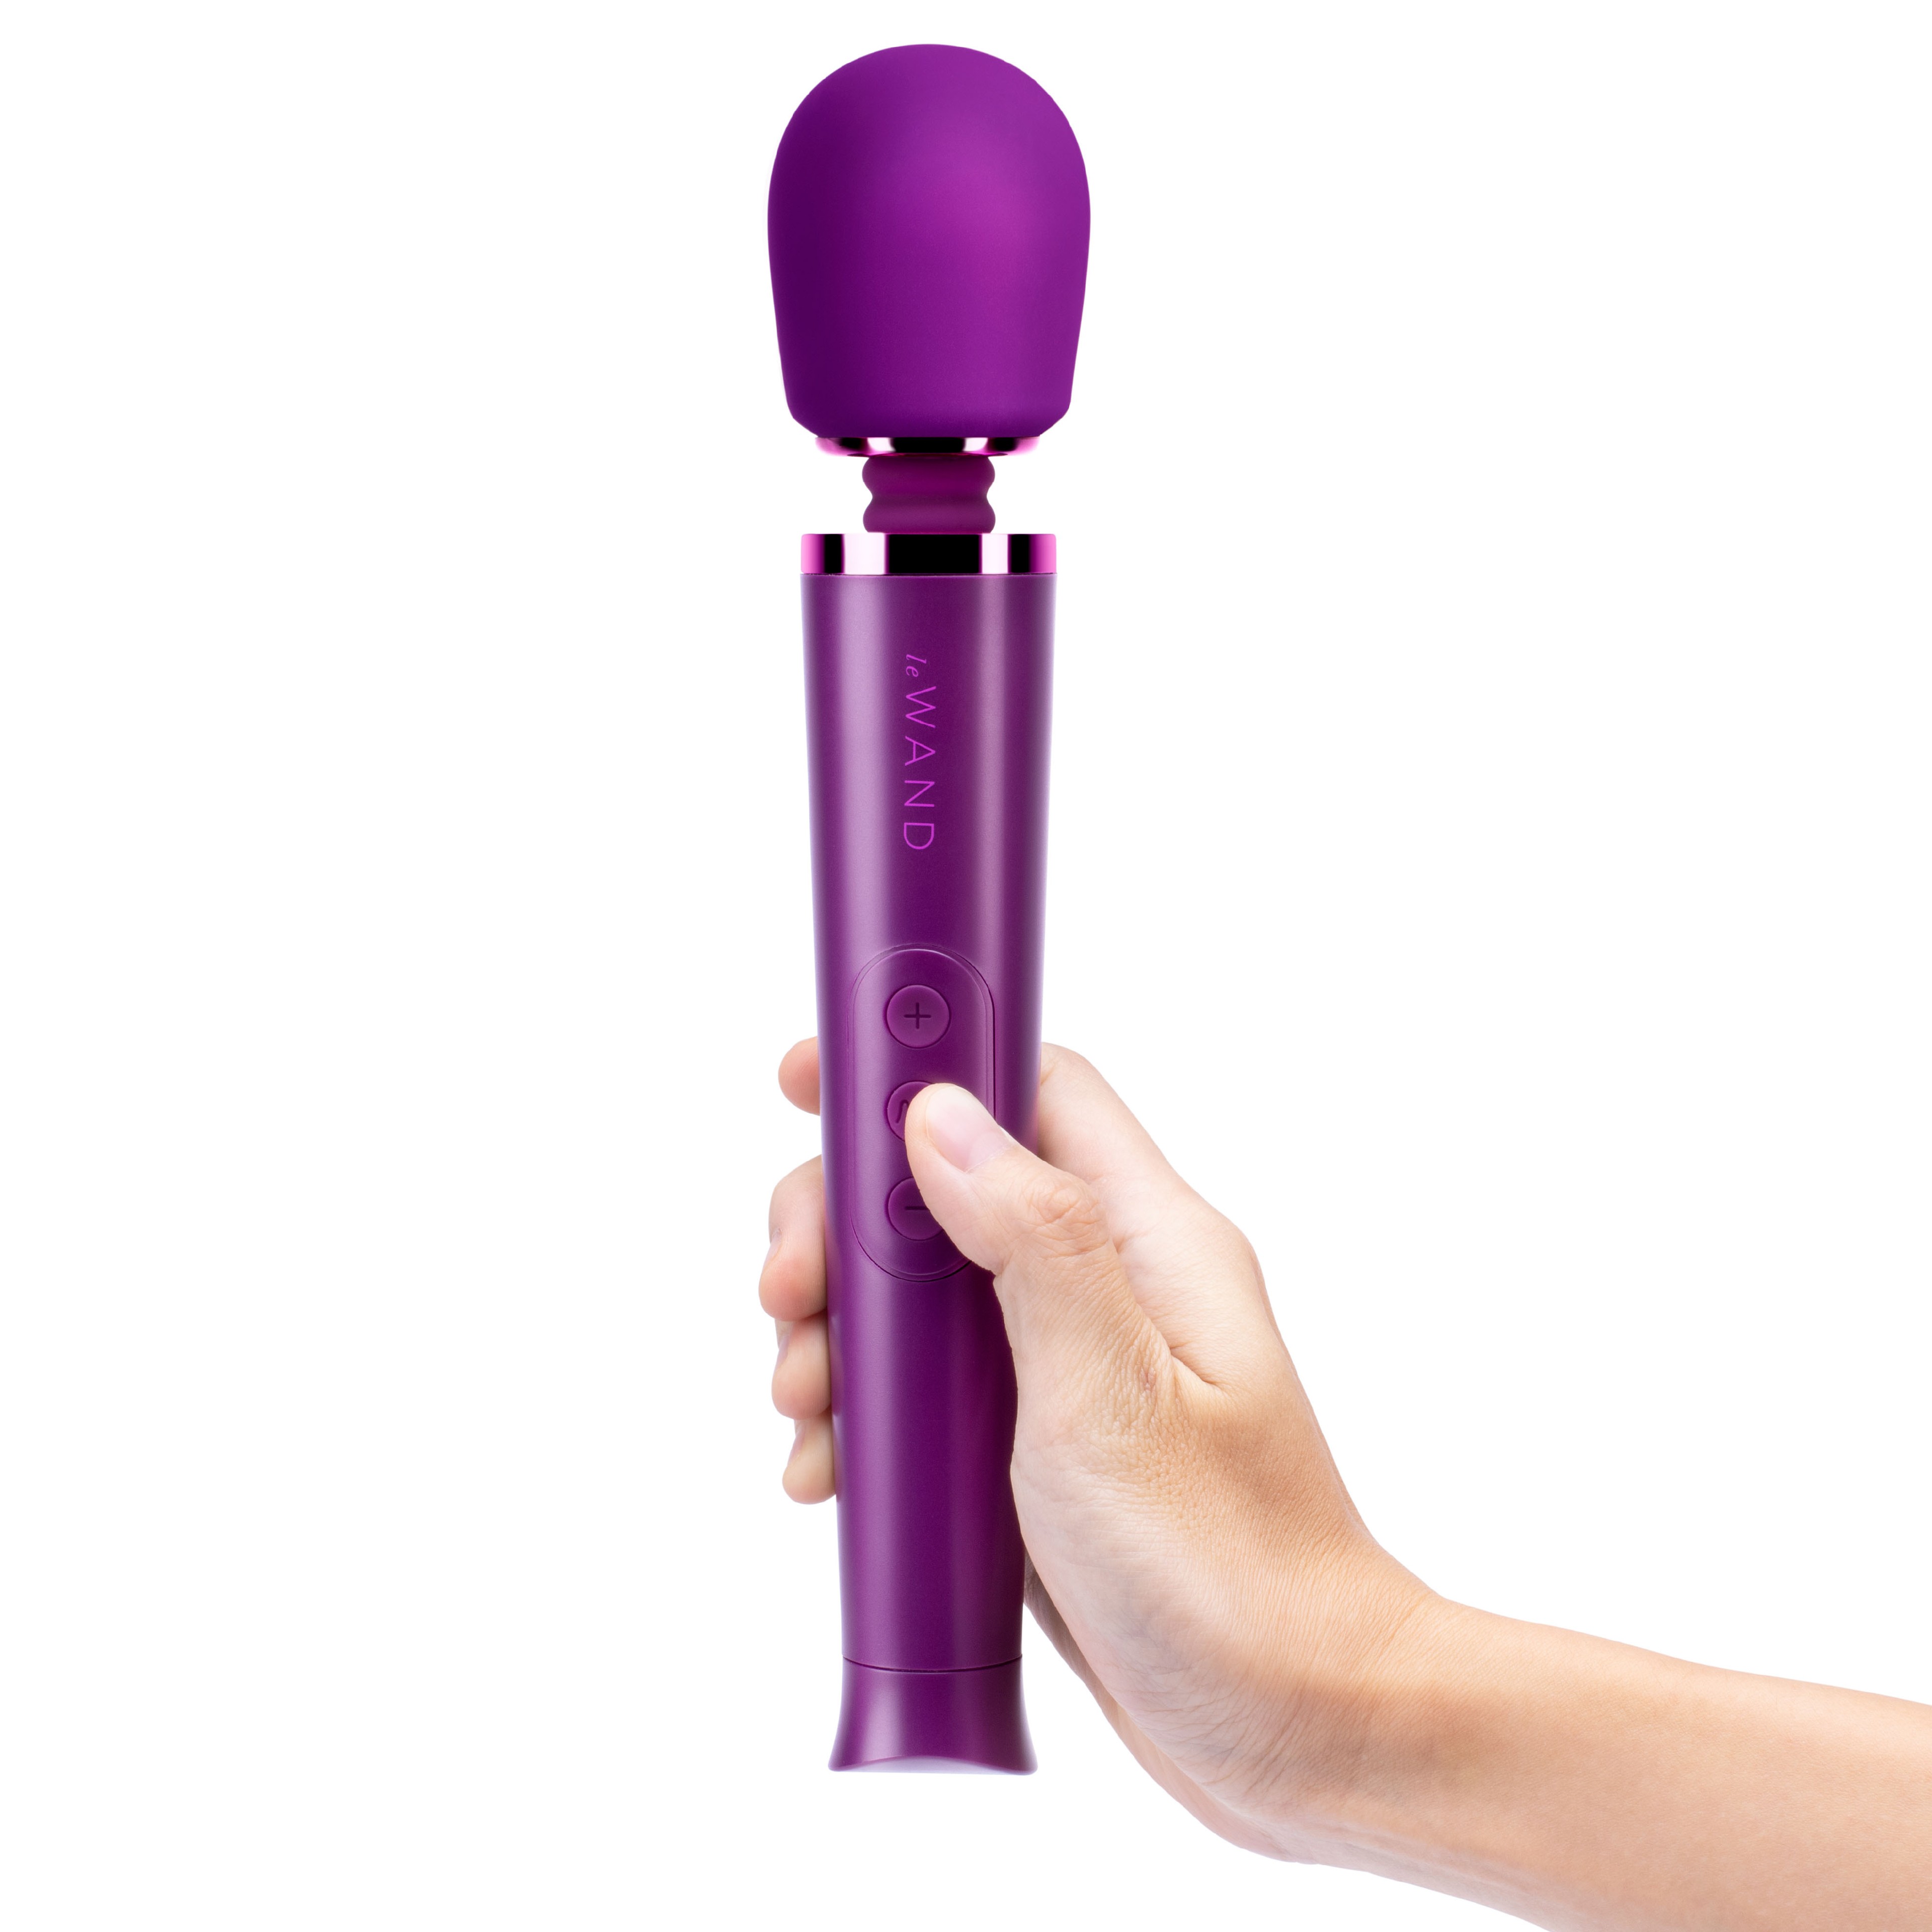 Le Wand Petite Rechargeable Vibrating Massager Cherry